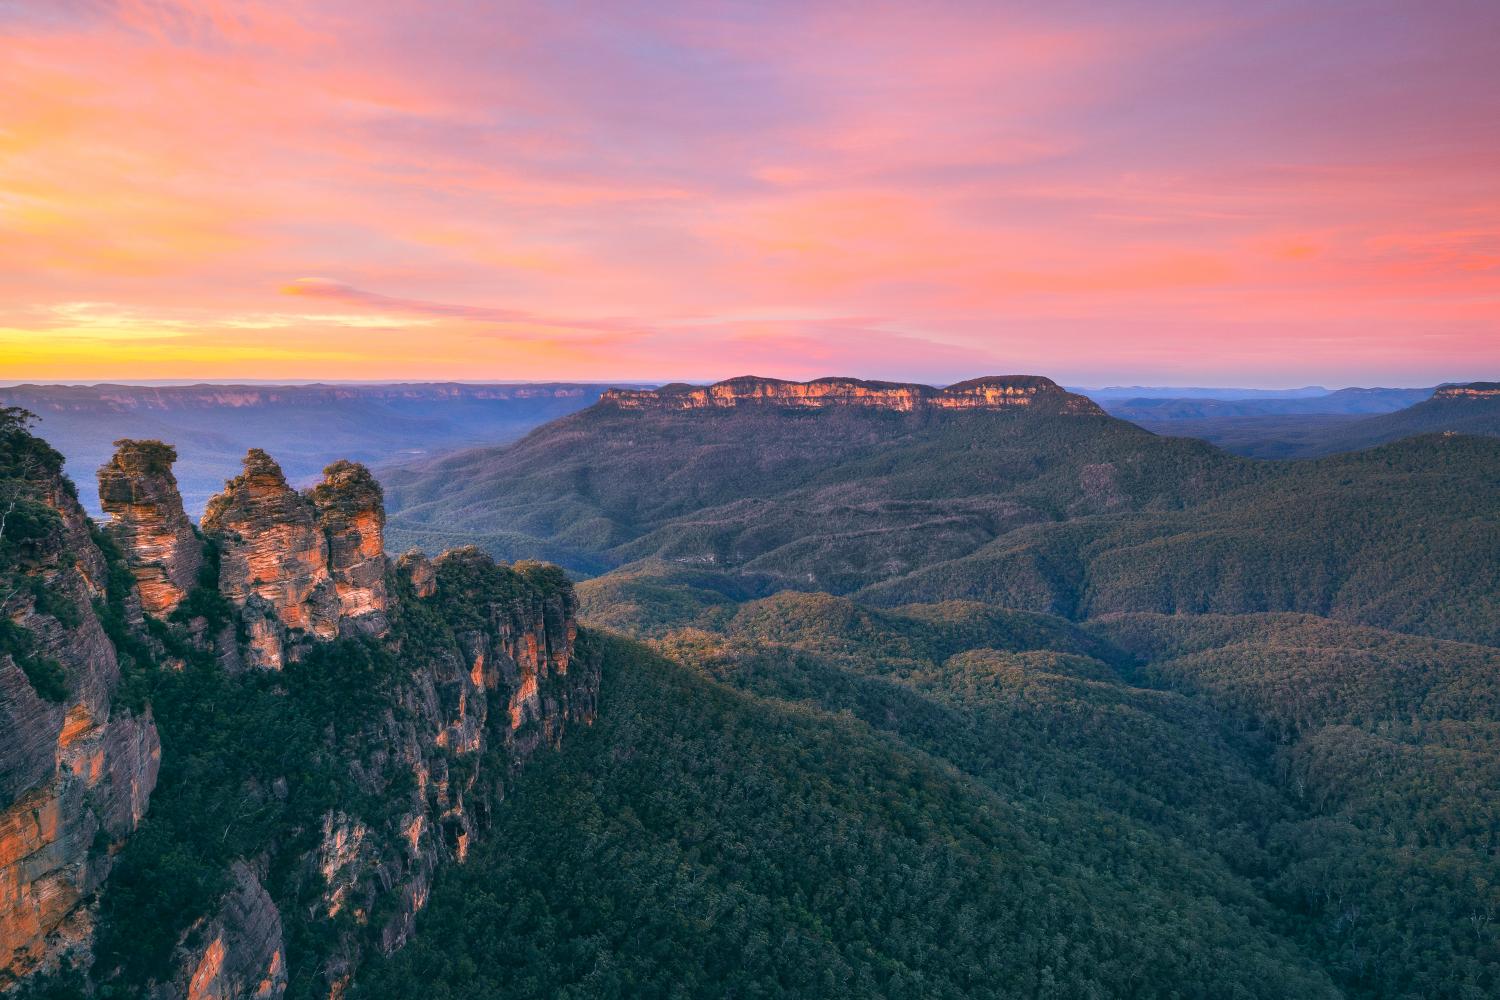 Sunrise over the Jamison Valley and the Three Sisters in the scenic Blue Mountains National Park